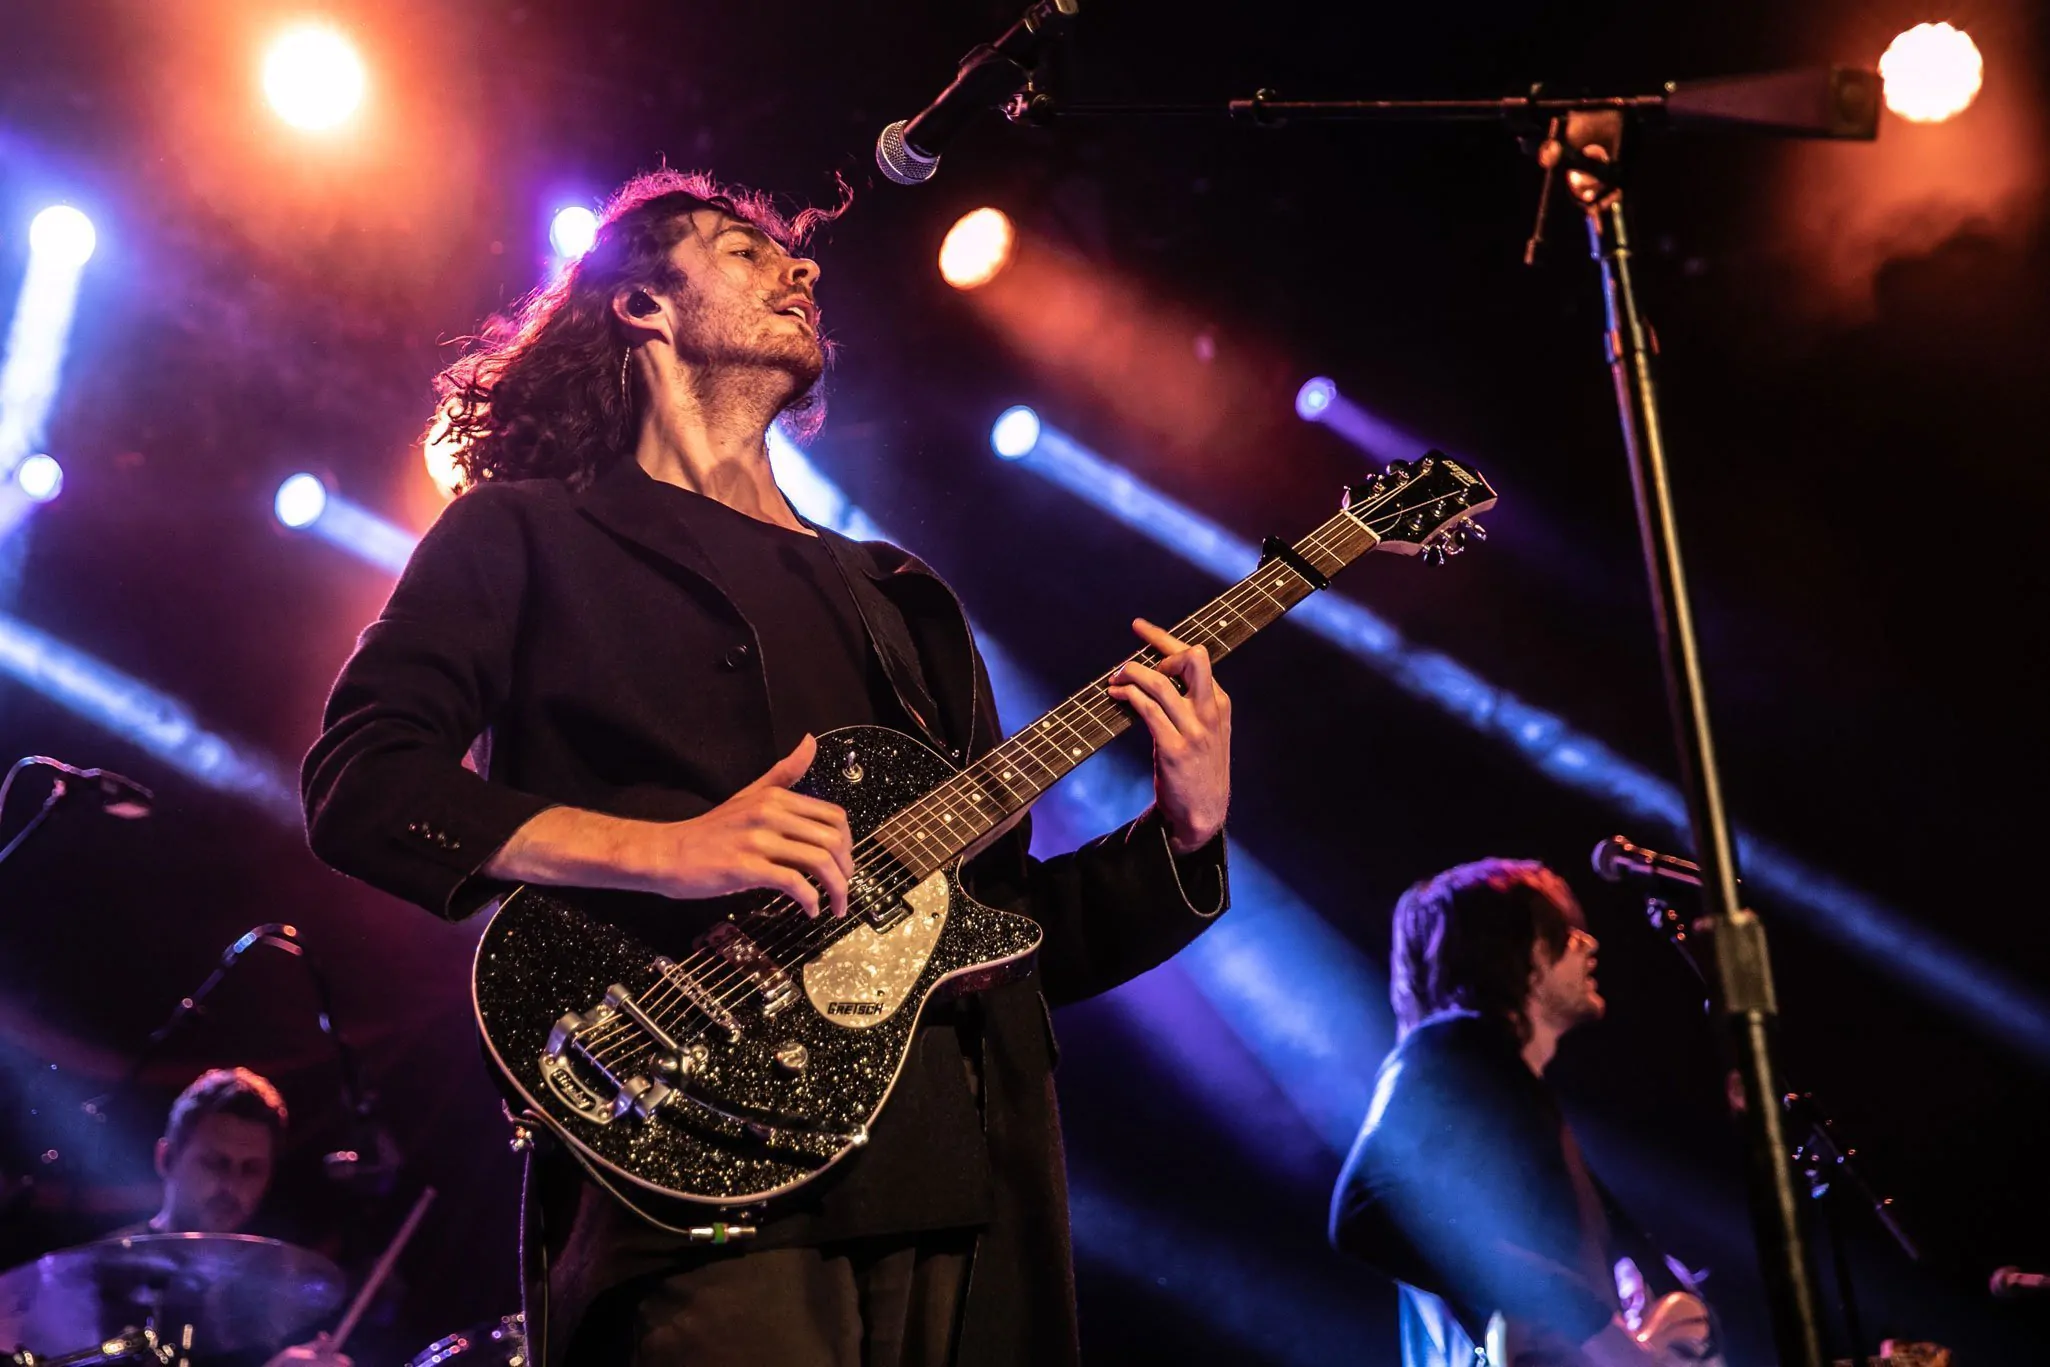 HOZIER has added a second show at 3Arena due to demand